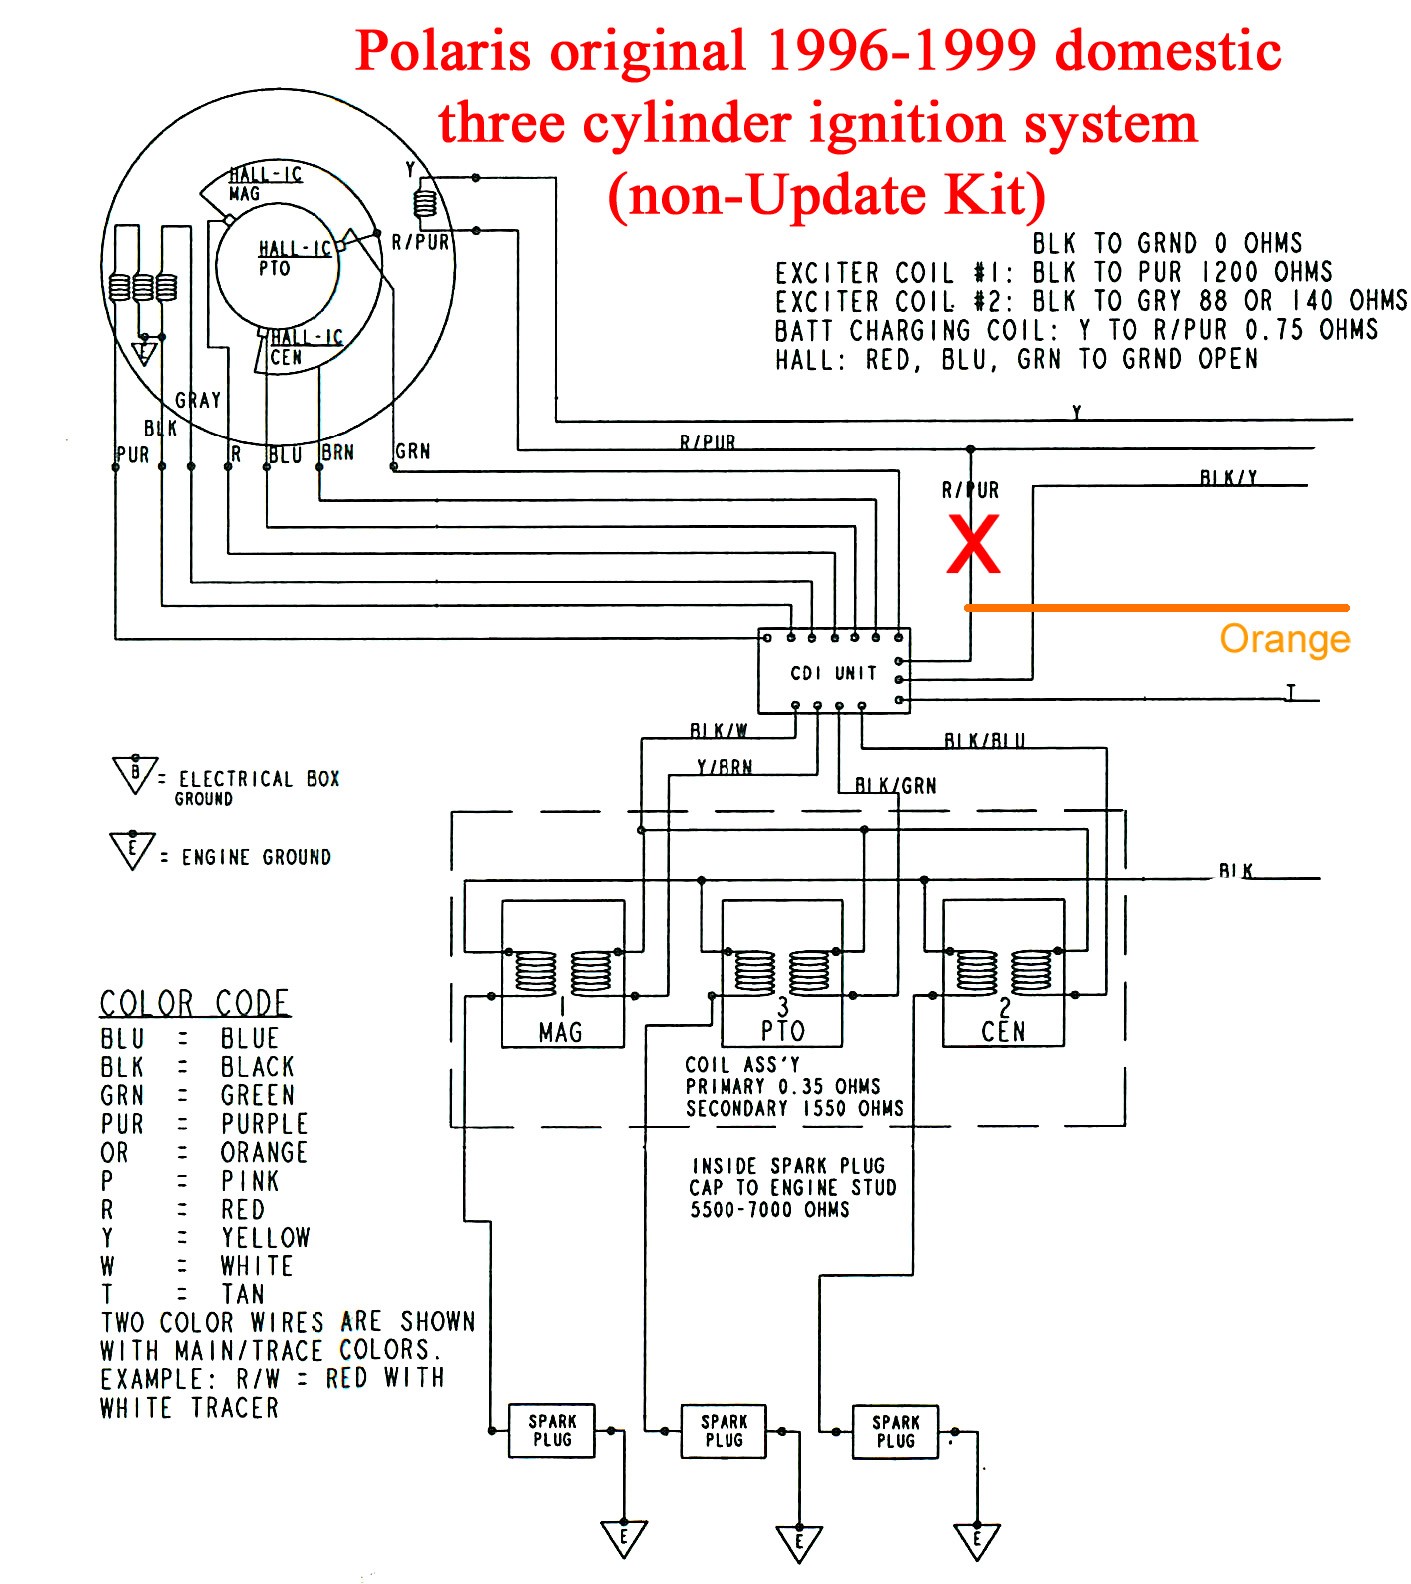 Car Ignition System Wiring Diagram Positive Ground Ignition Wiring Diagram Wiring A Motor Car Of Car Ignition System Wiring Diagram